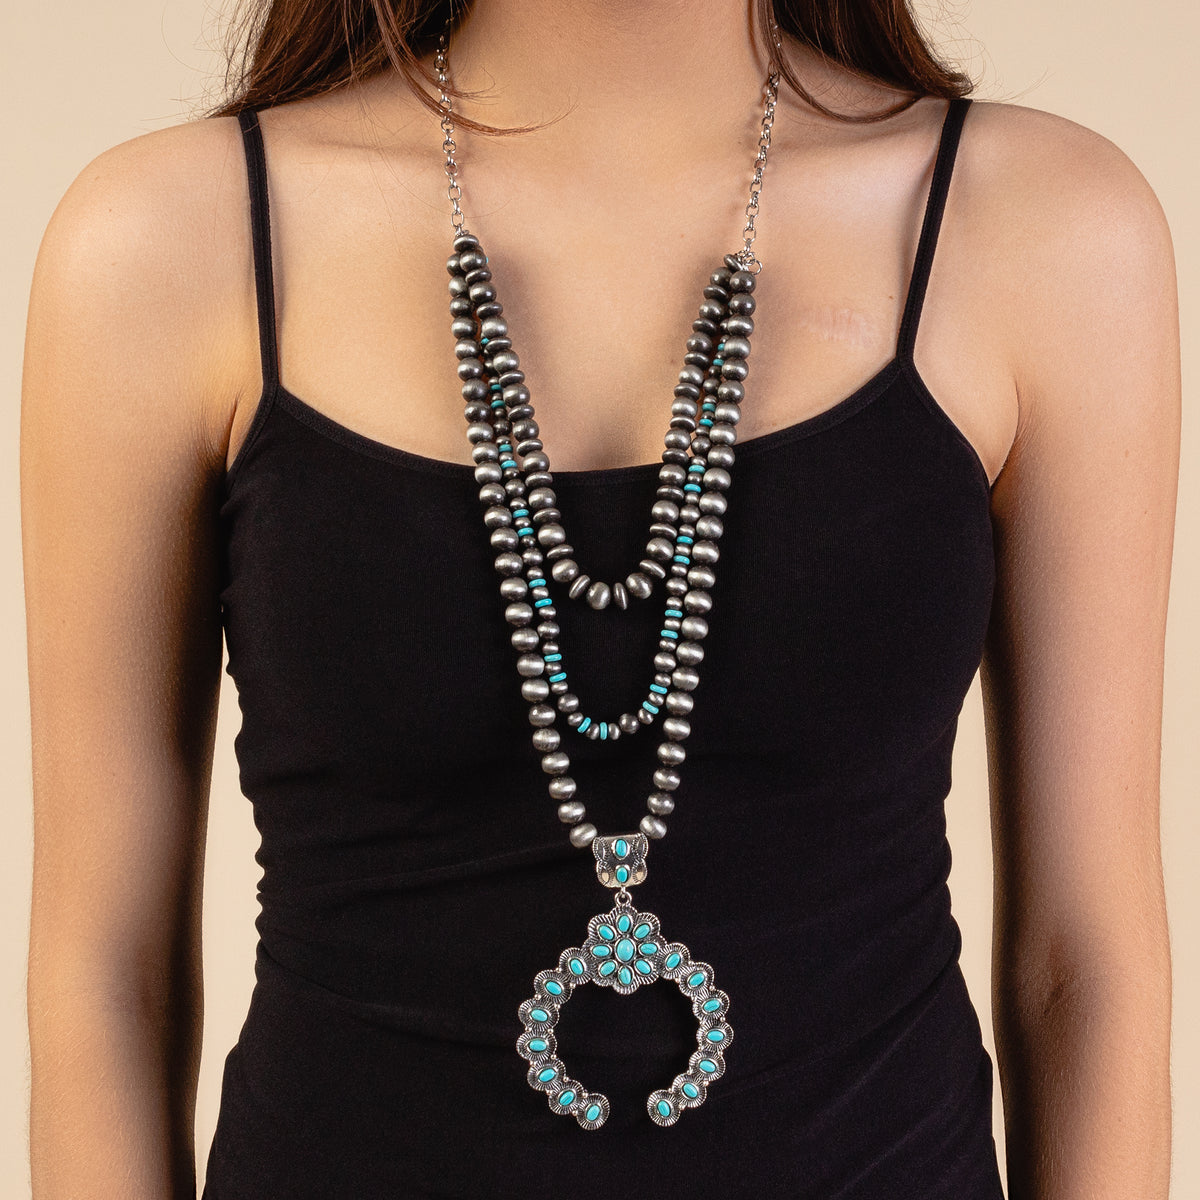 72885 - Western Squash Blossom Necklace - Turquoise & Silver